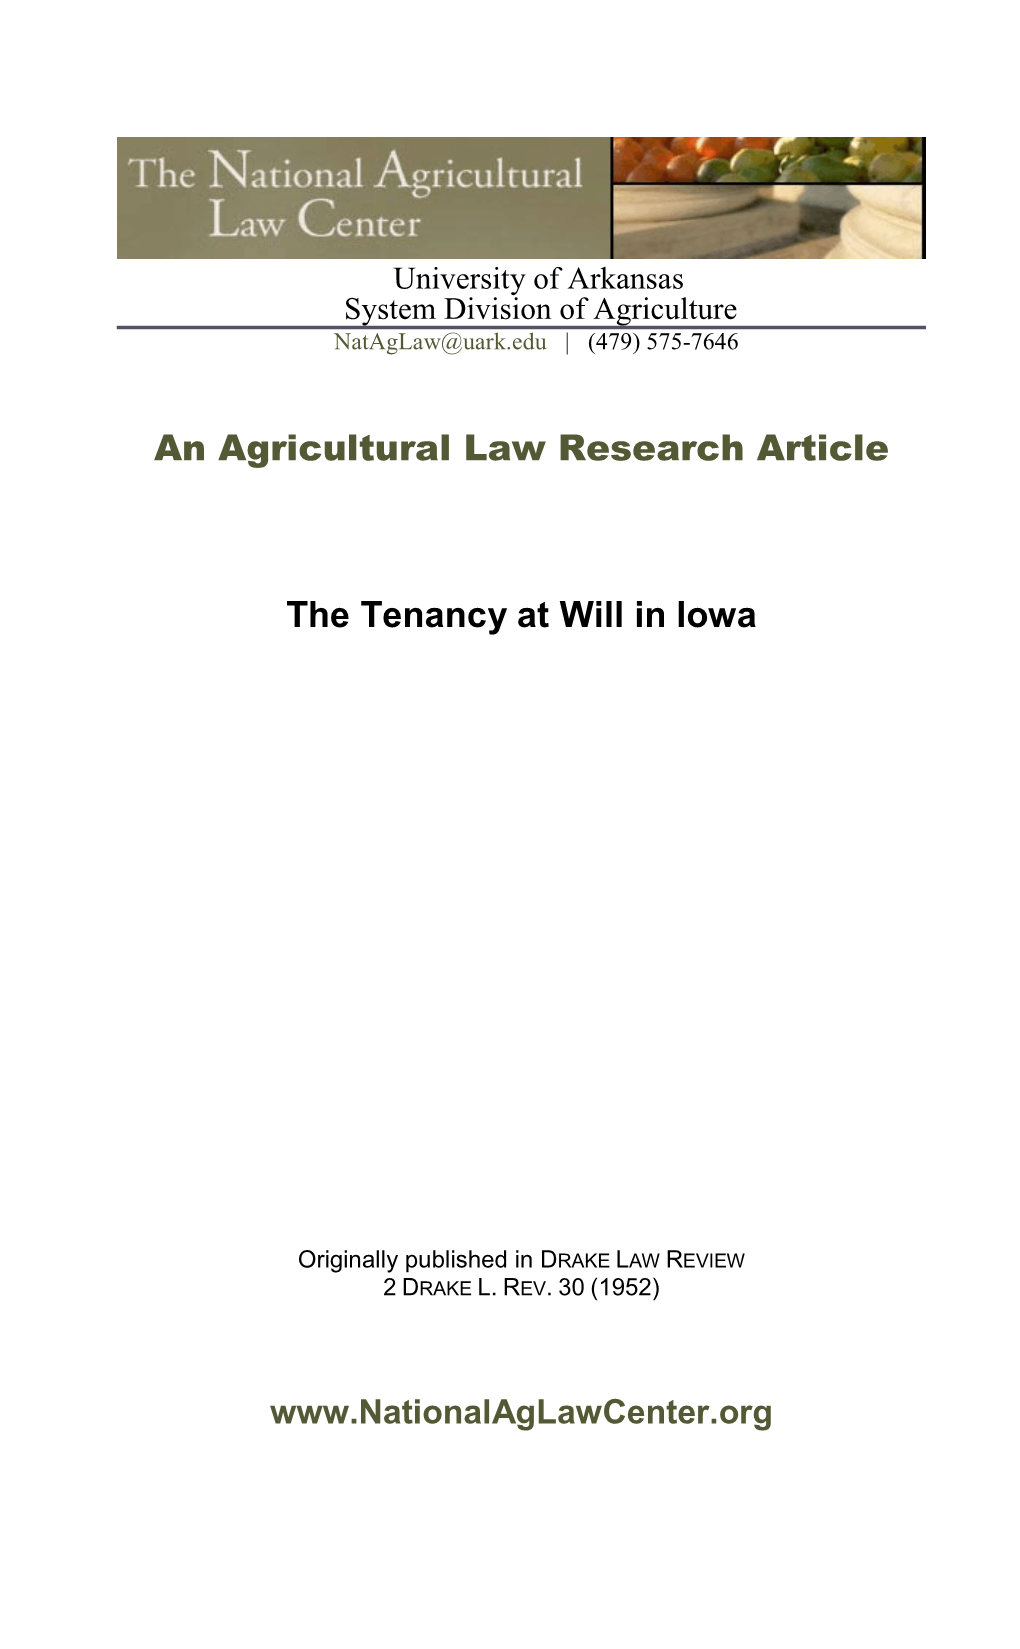 An Agricultural Law Research Article the Tenancy at Will in Iowa